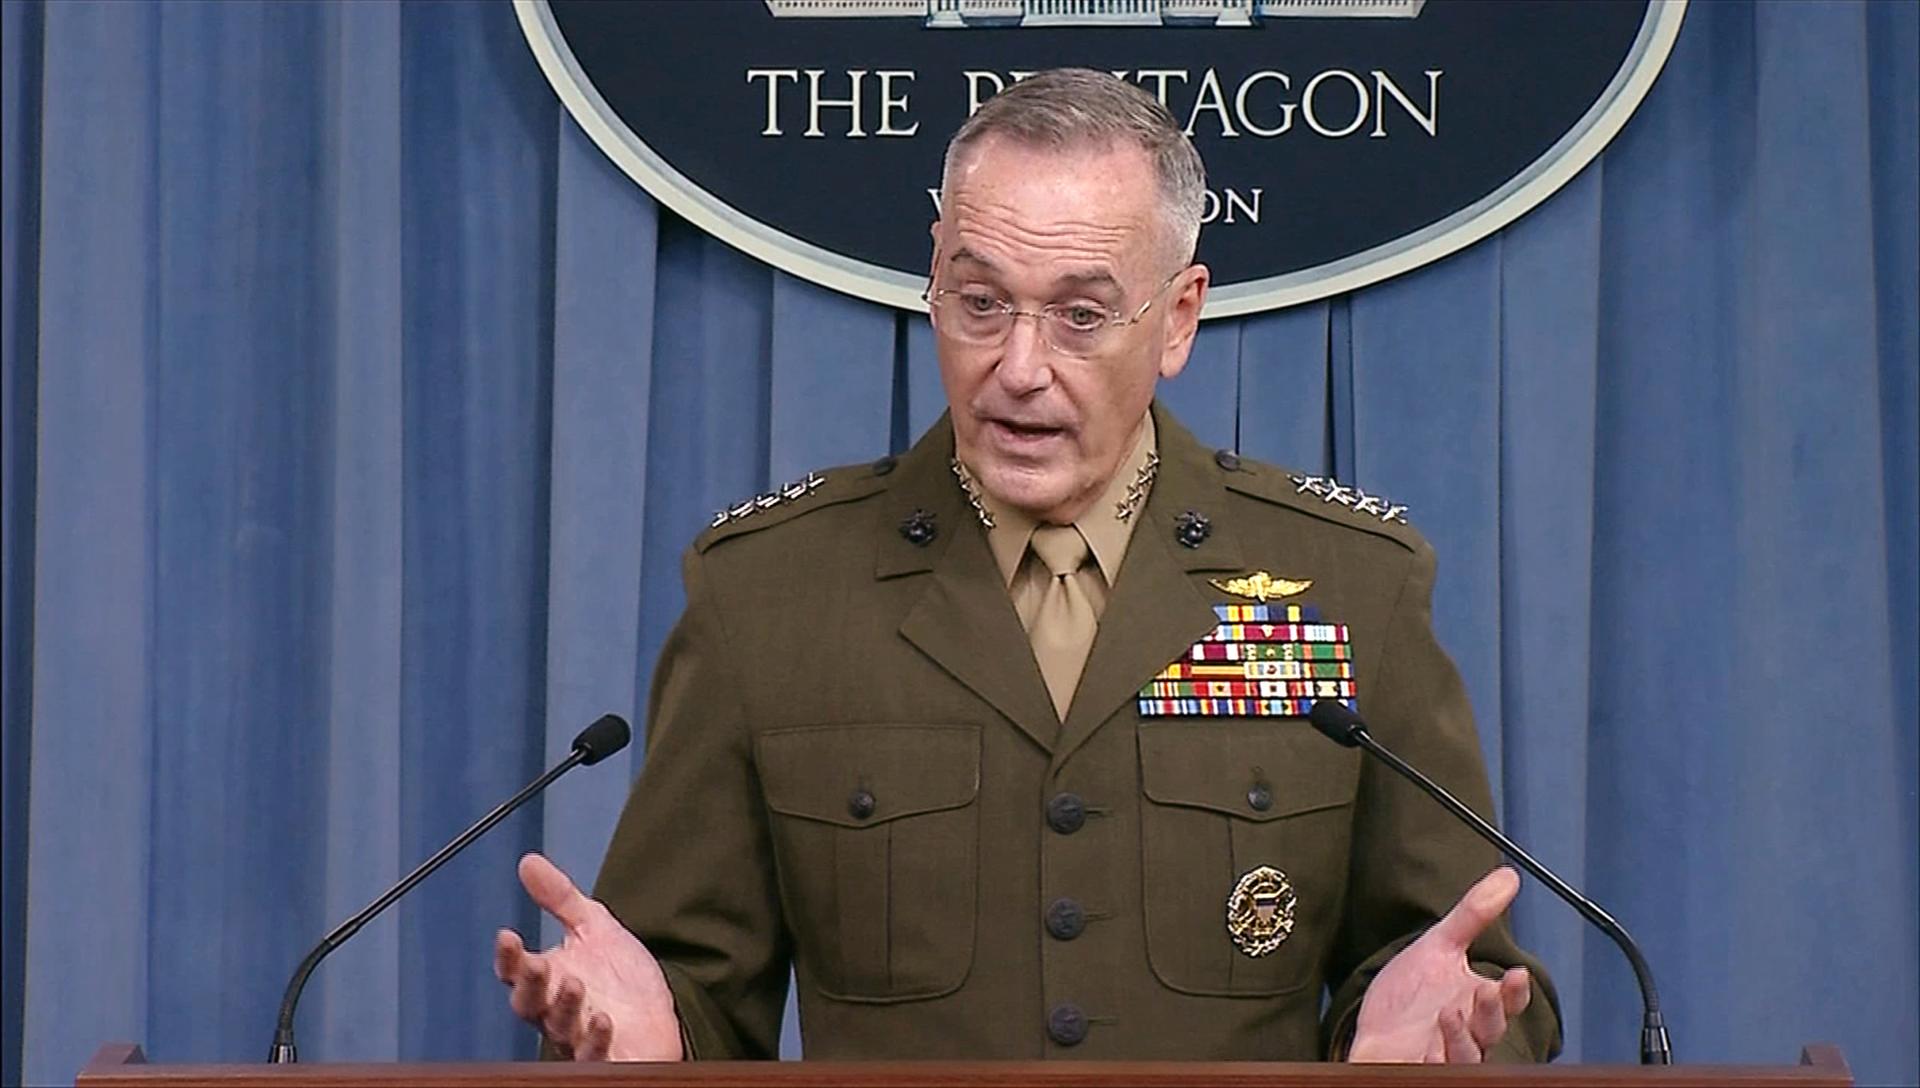 US Joint Chiefs of Staff Chairman General Joseph Dunford is stands at a podium during a press conference.